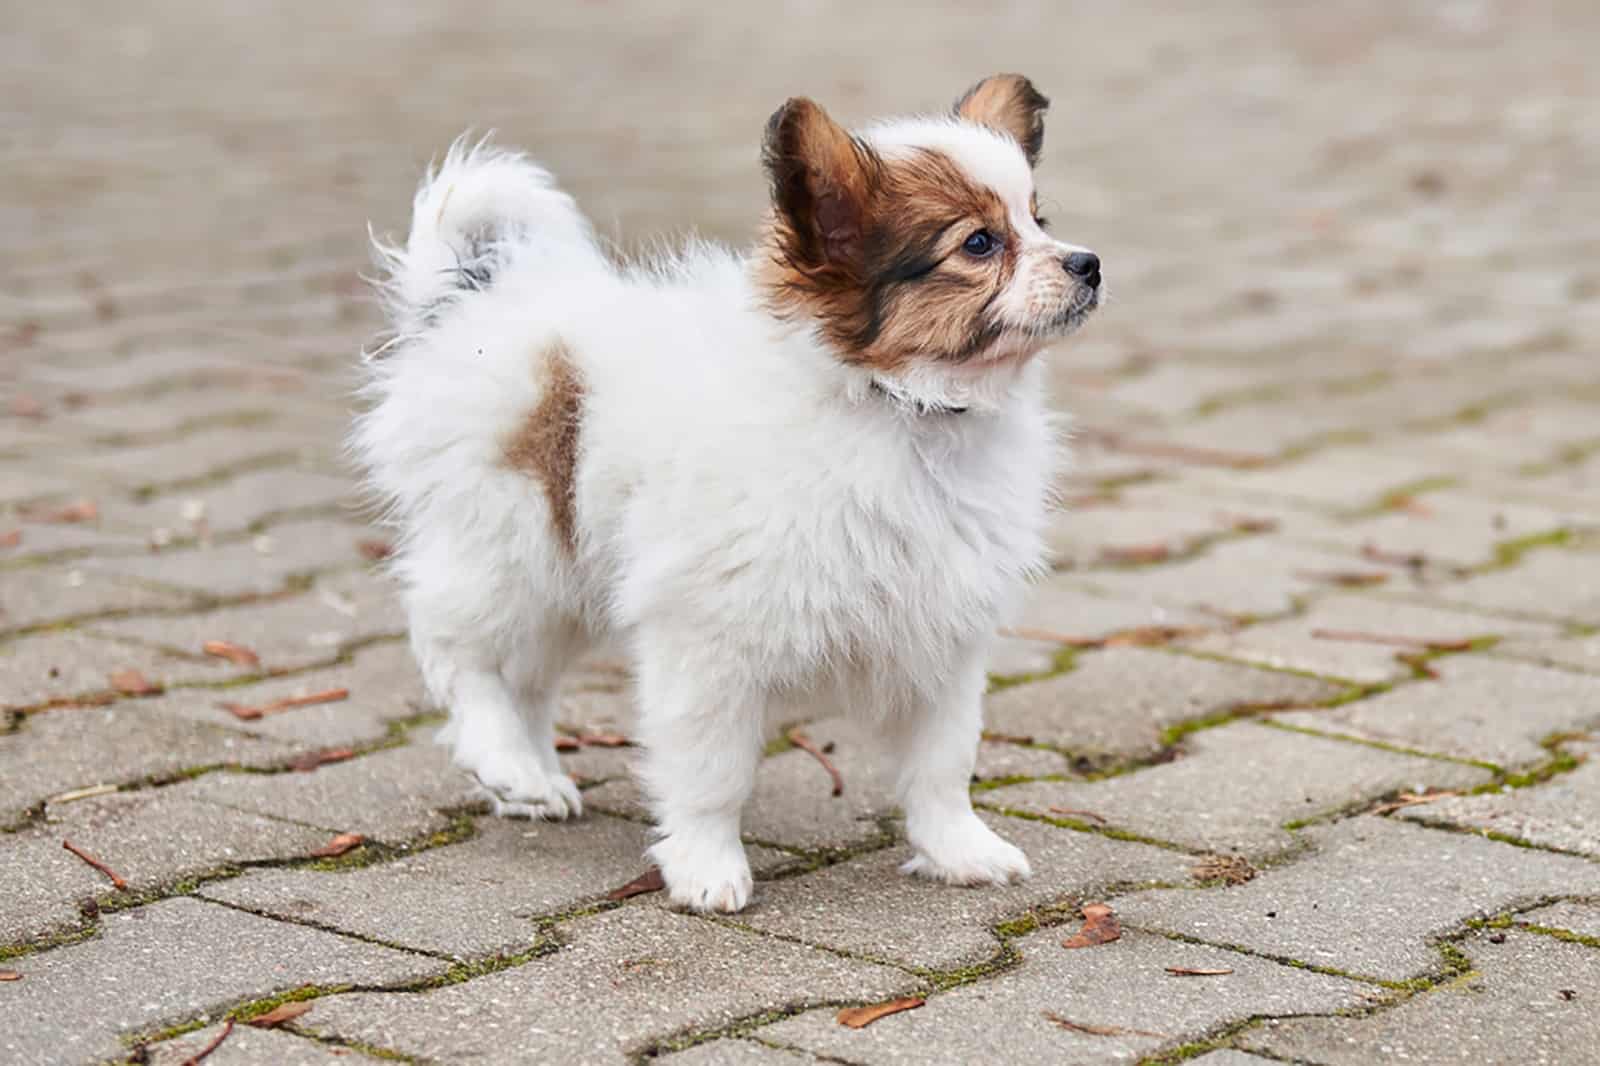 papillon puppy standing in the yard at daytime